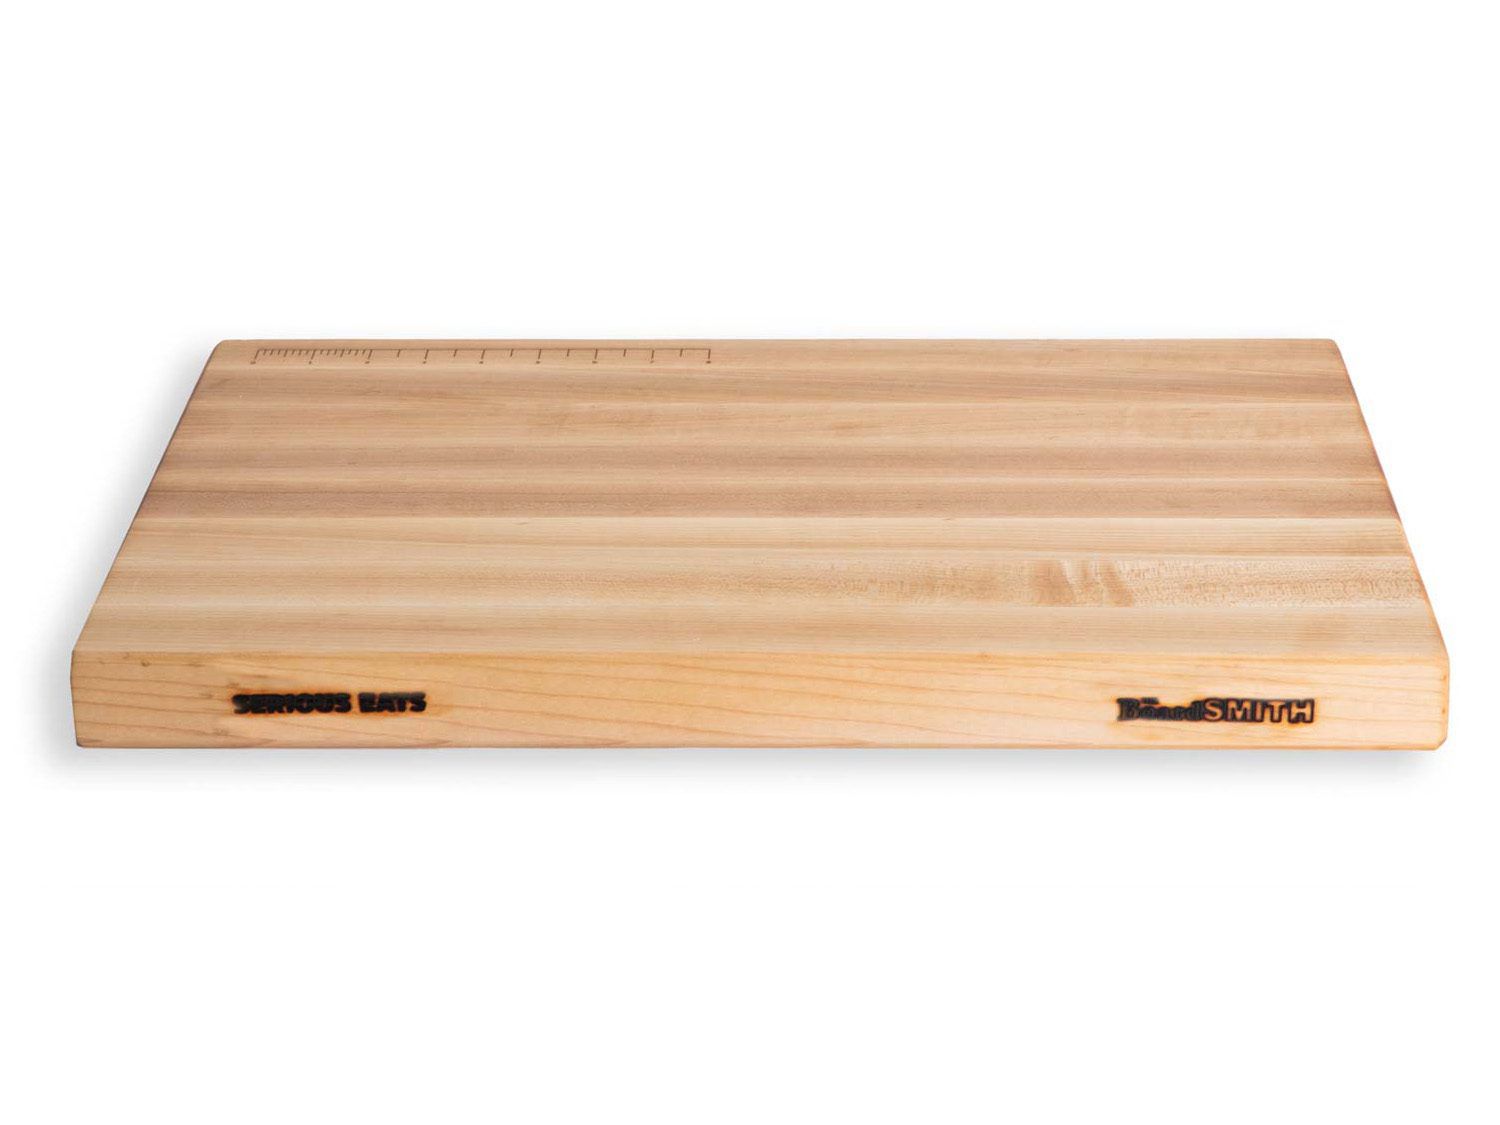 Serious Eats BoardSmith cutting board against a white background